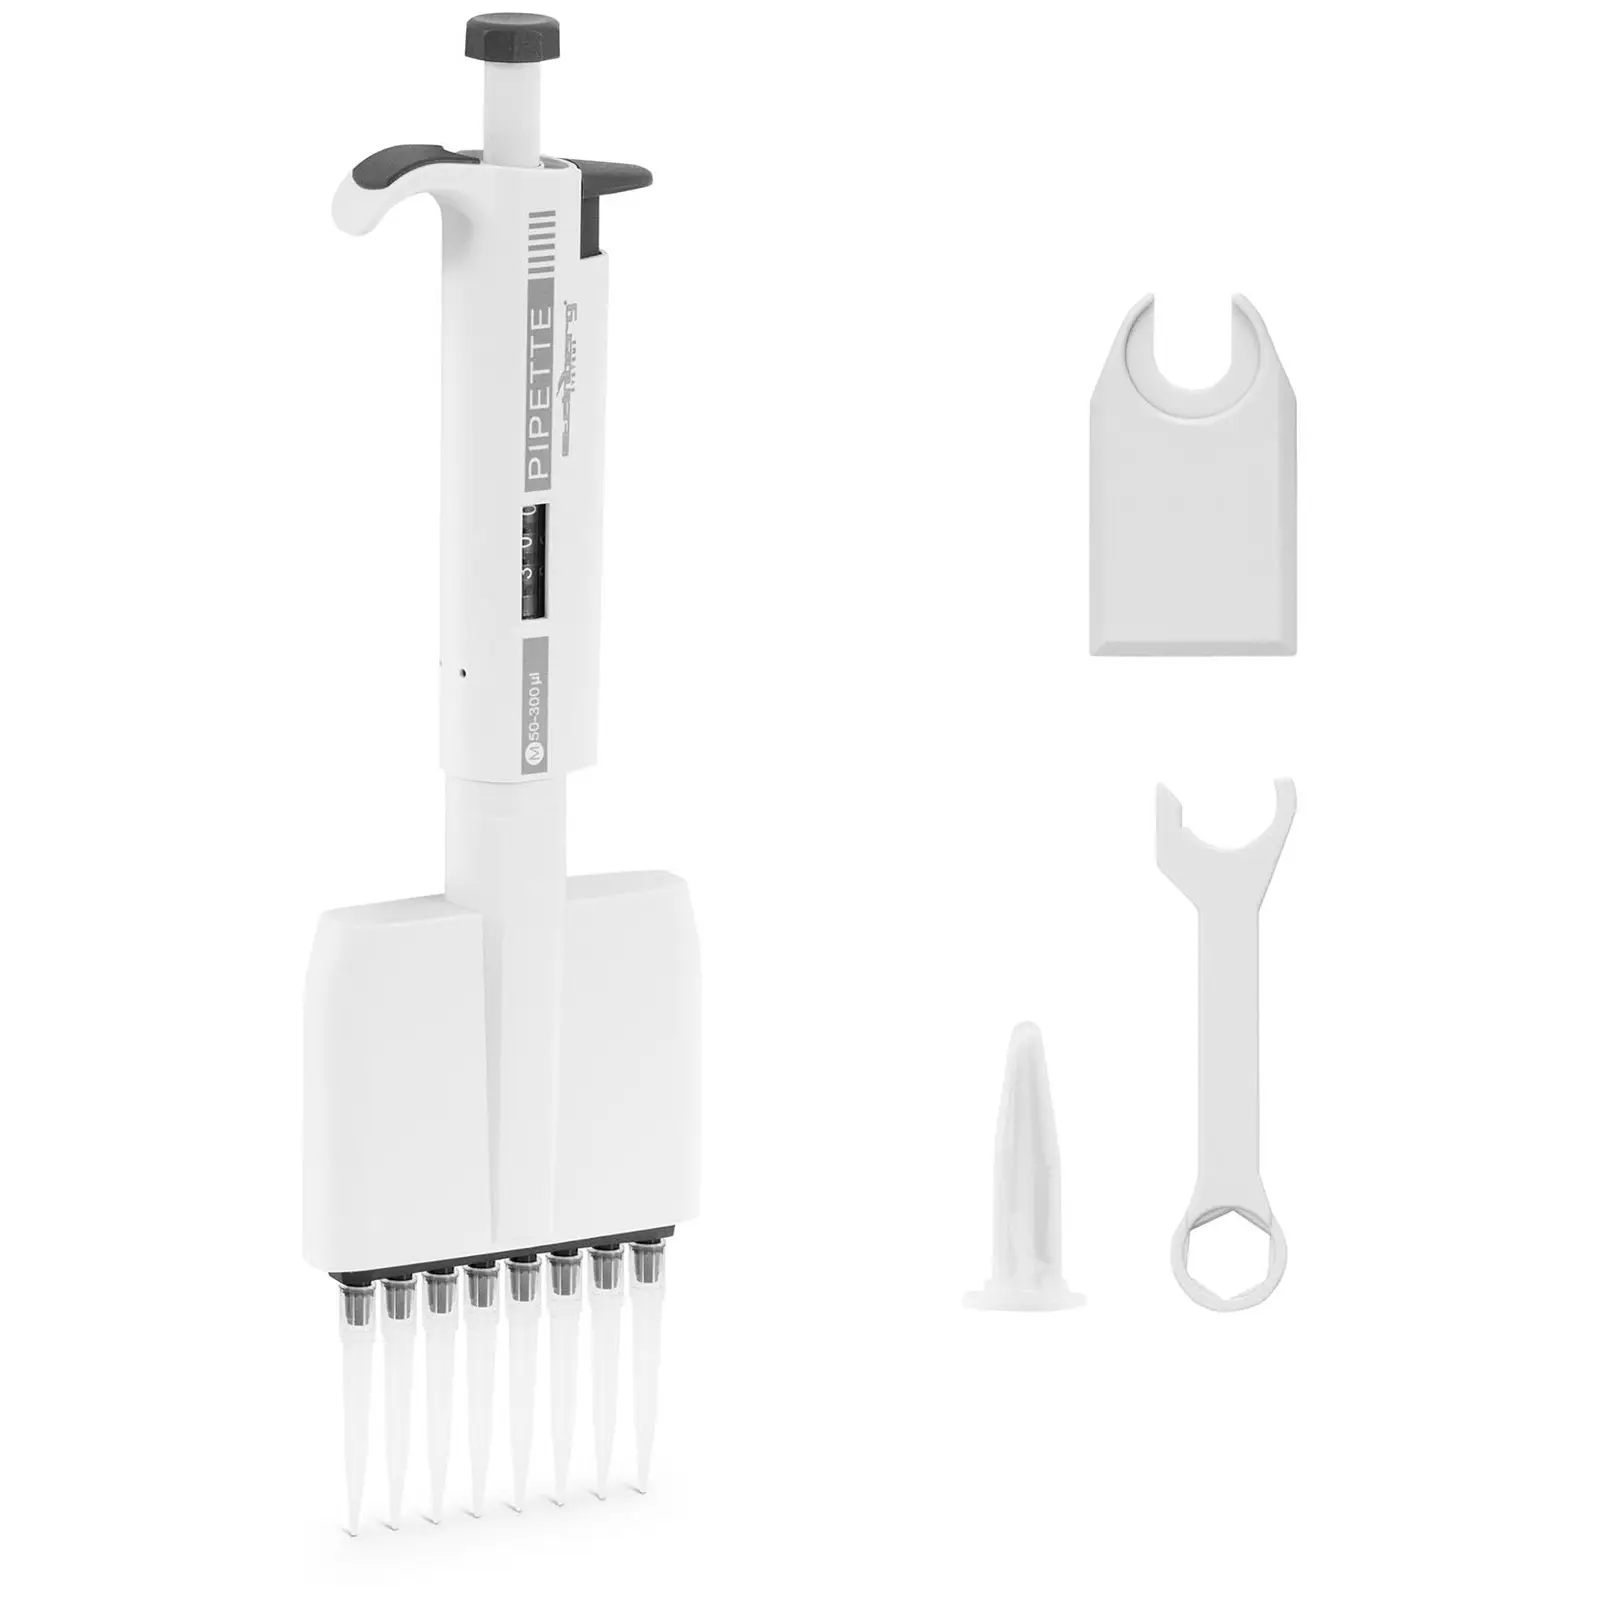 Multichannel Pipette - For 8 Tips - 0,05 - 0,3 Ml 8-channel Pipette Pipetting